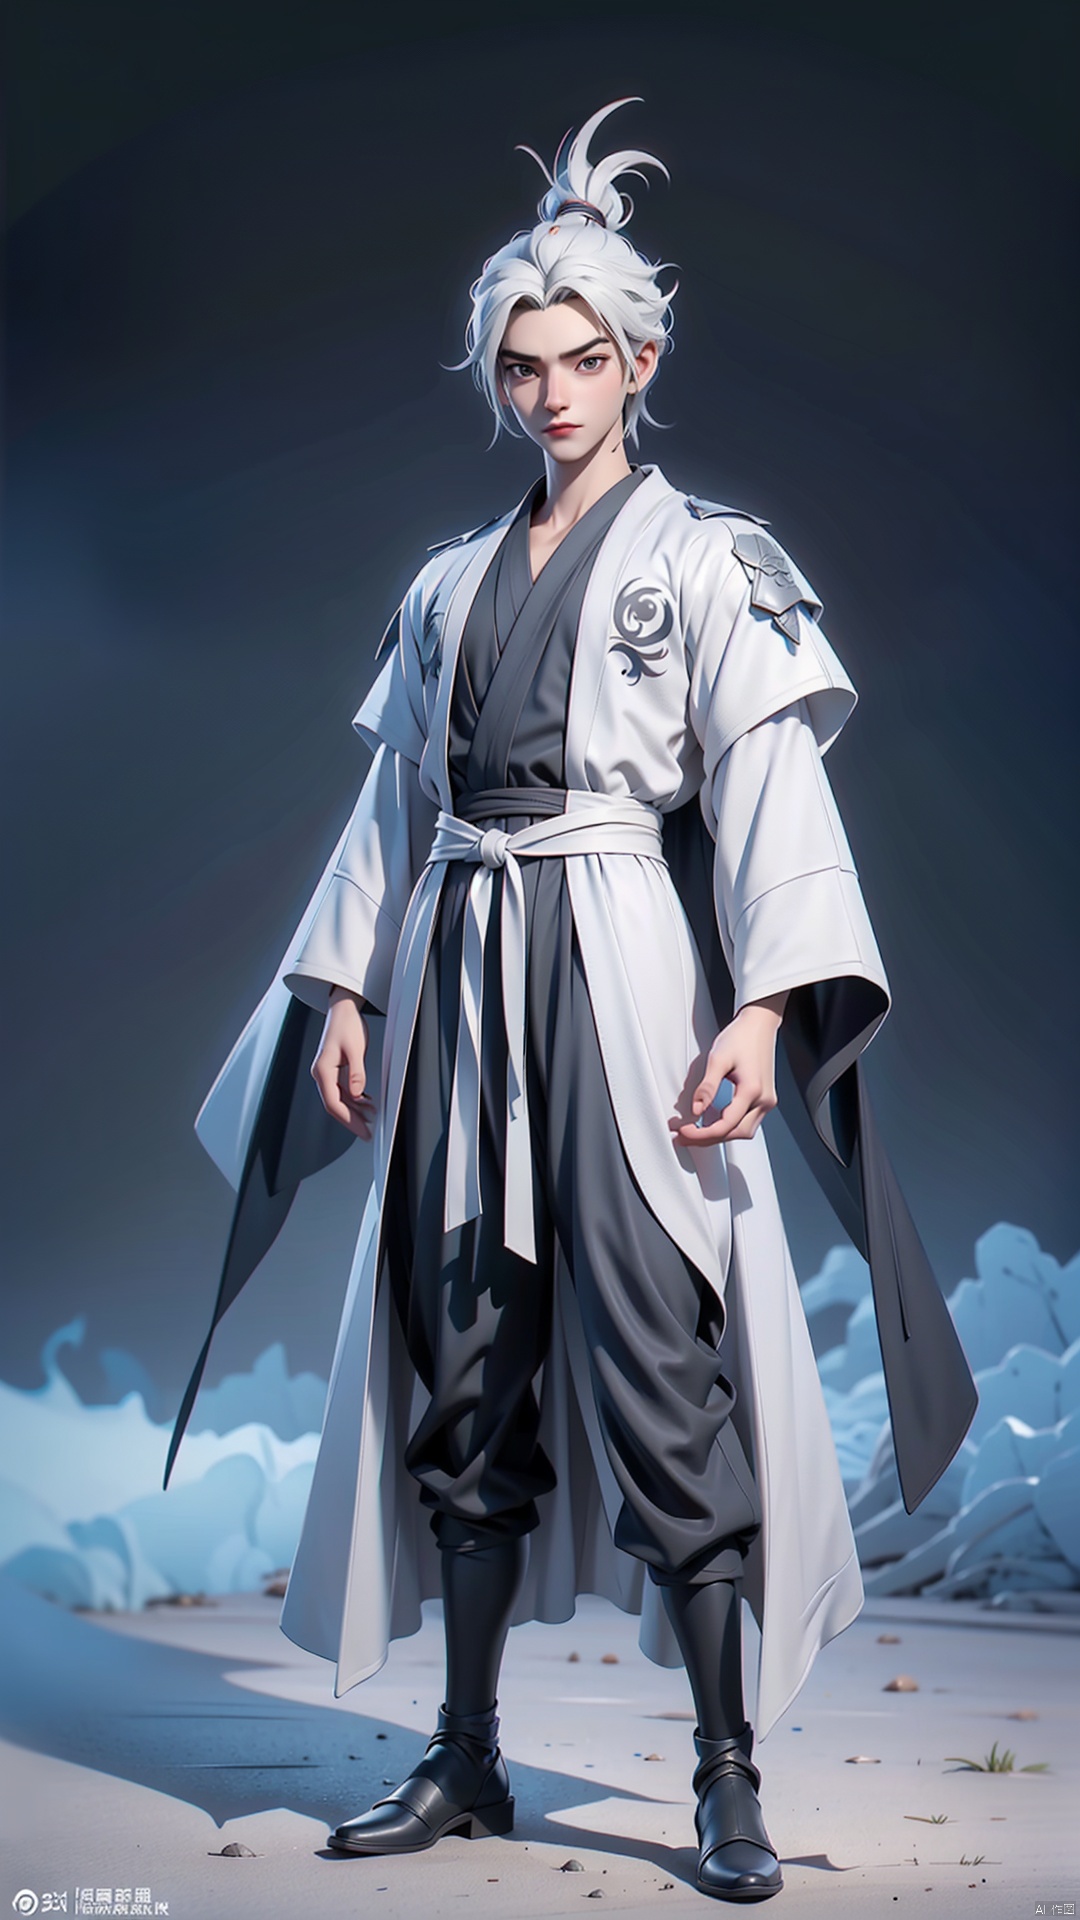 Renegade Immortal,Wang Lin,
1 boy,full body,masterpiece,standing,
White model rendering,4K,Official art,best quality, extremely detailed,CG,C4D,single color,plastic,Handmade,